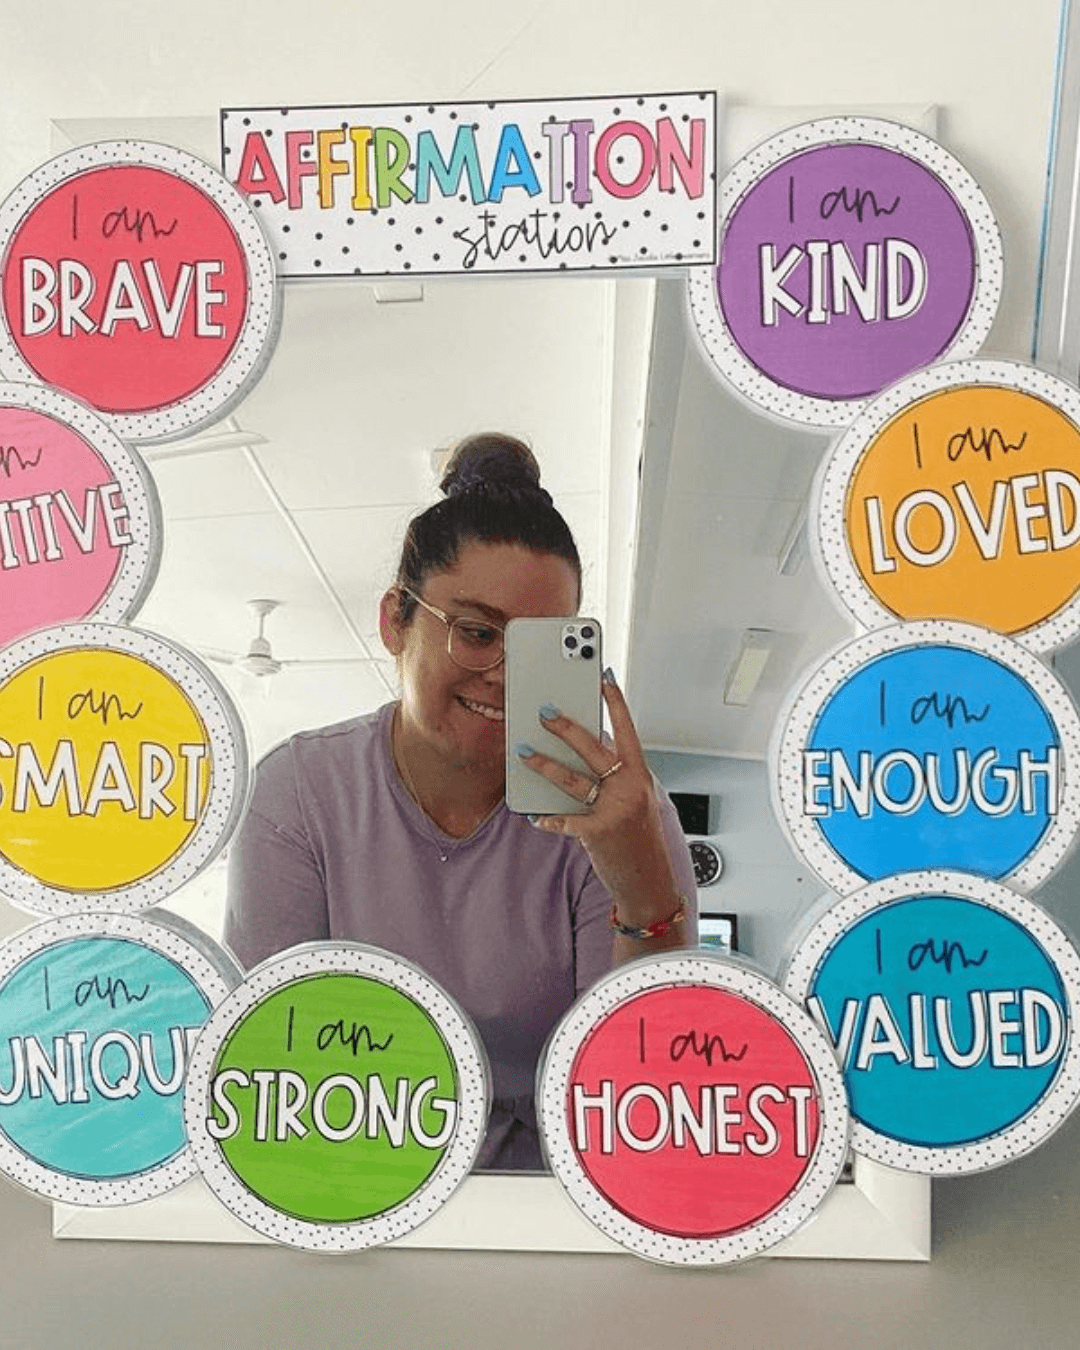 Three images show the Spotty Brights Affirmation Stations around a tall, square and round mirror in three different classrooms. In the middle and right image, we see two smiling teachers taking a photo in the mirror.” style=